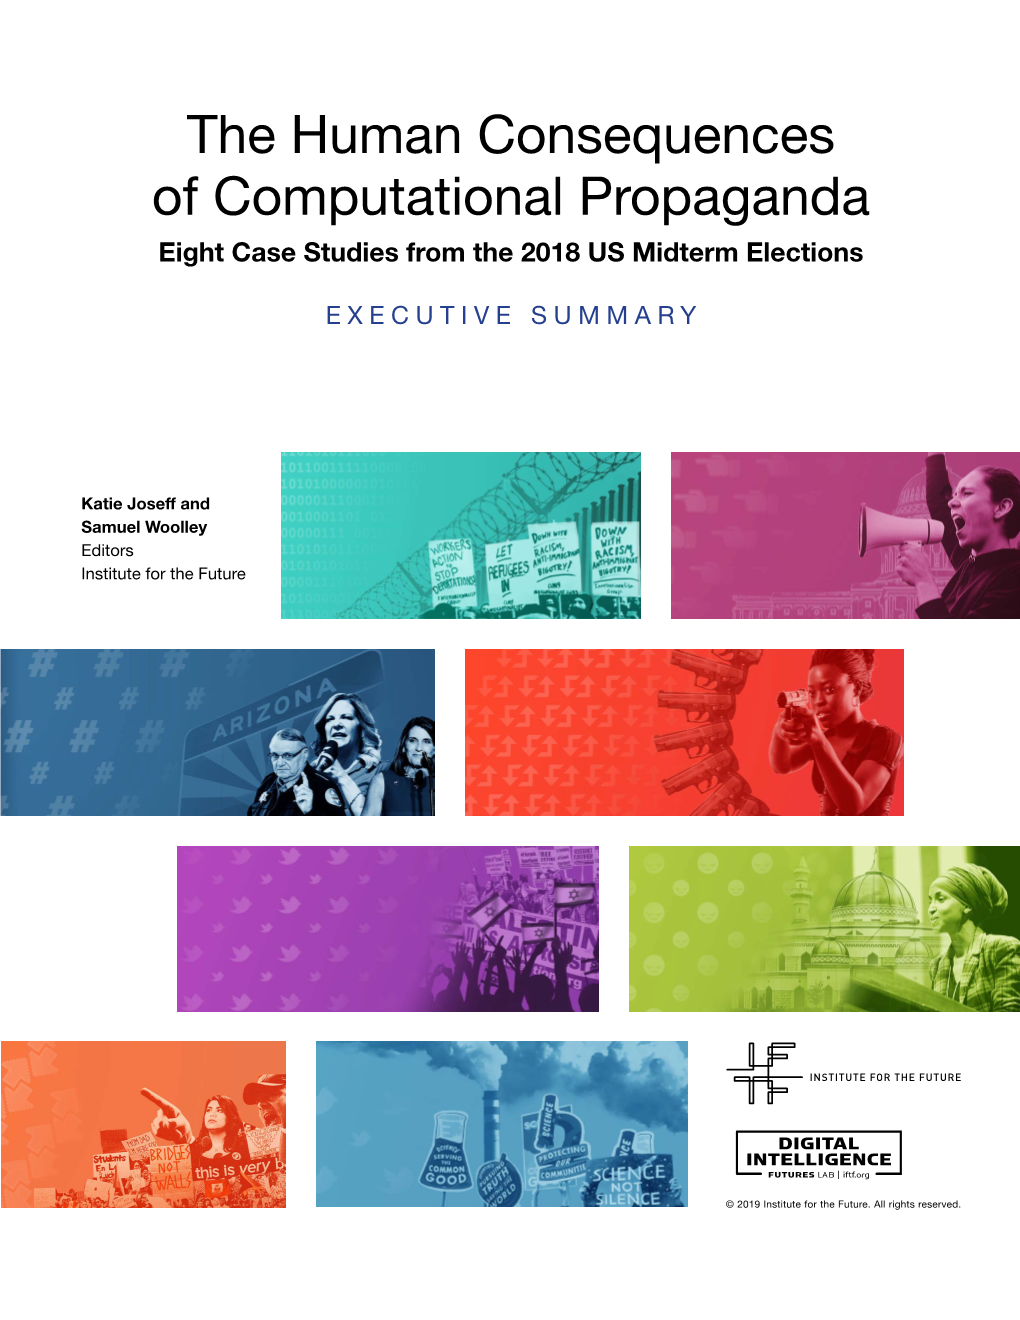 The Human Consequences of Computational Propaganda Eight Case Studies from the 2018 US Midterm Elections